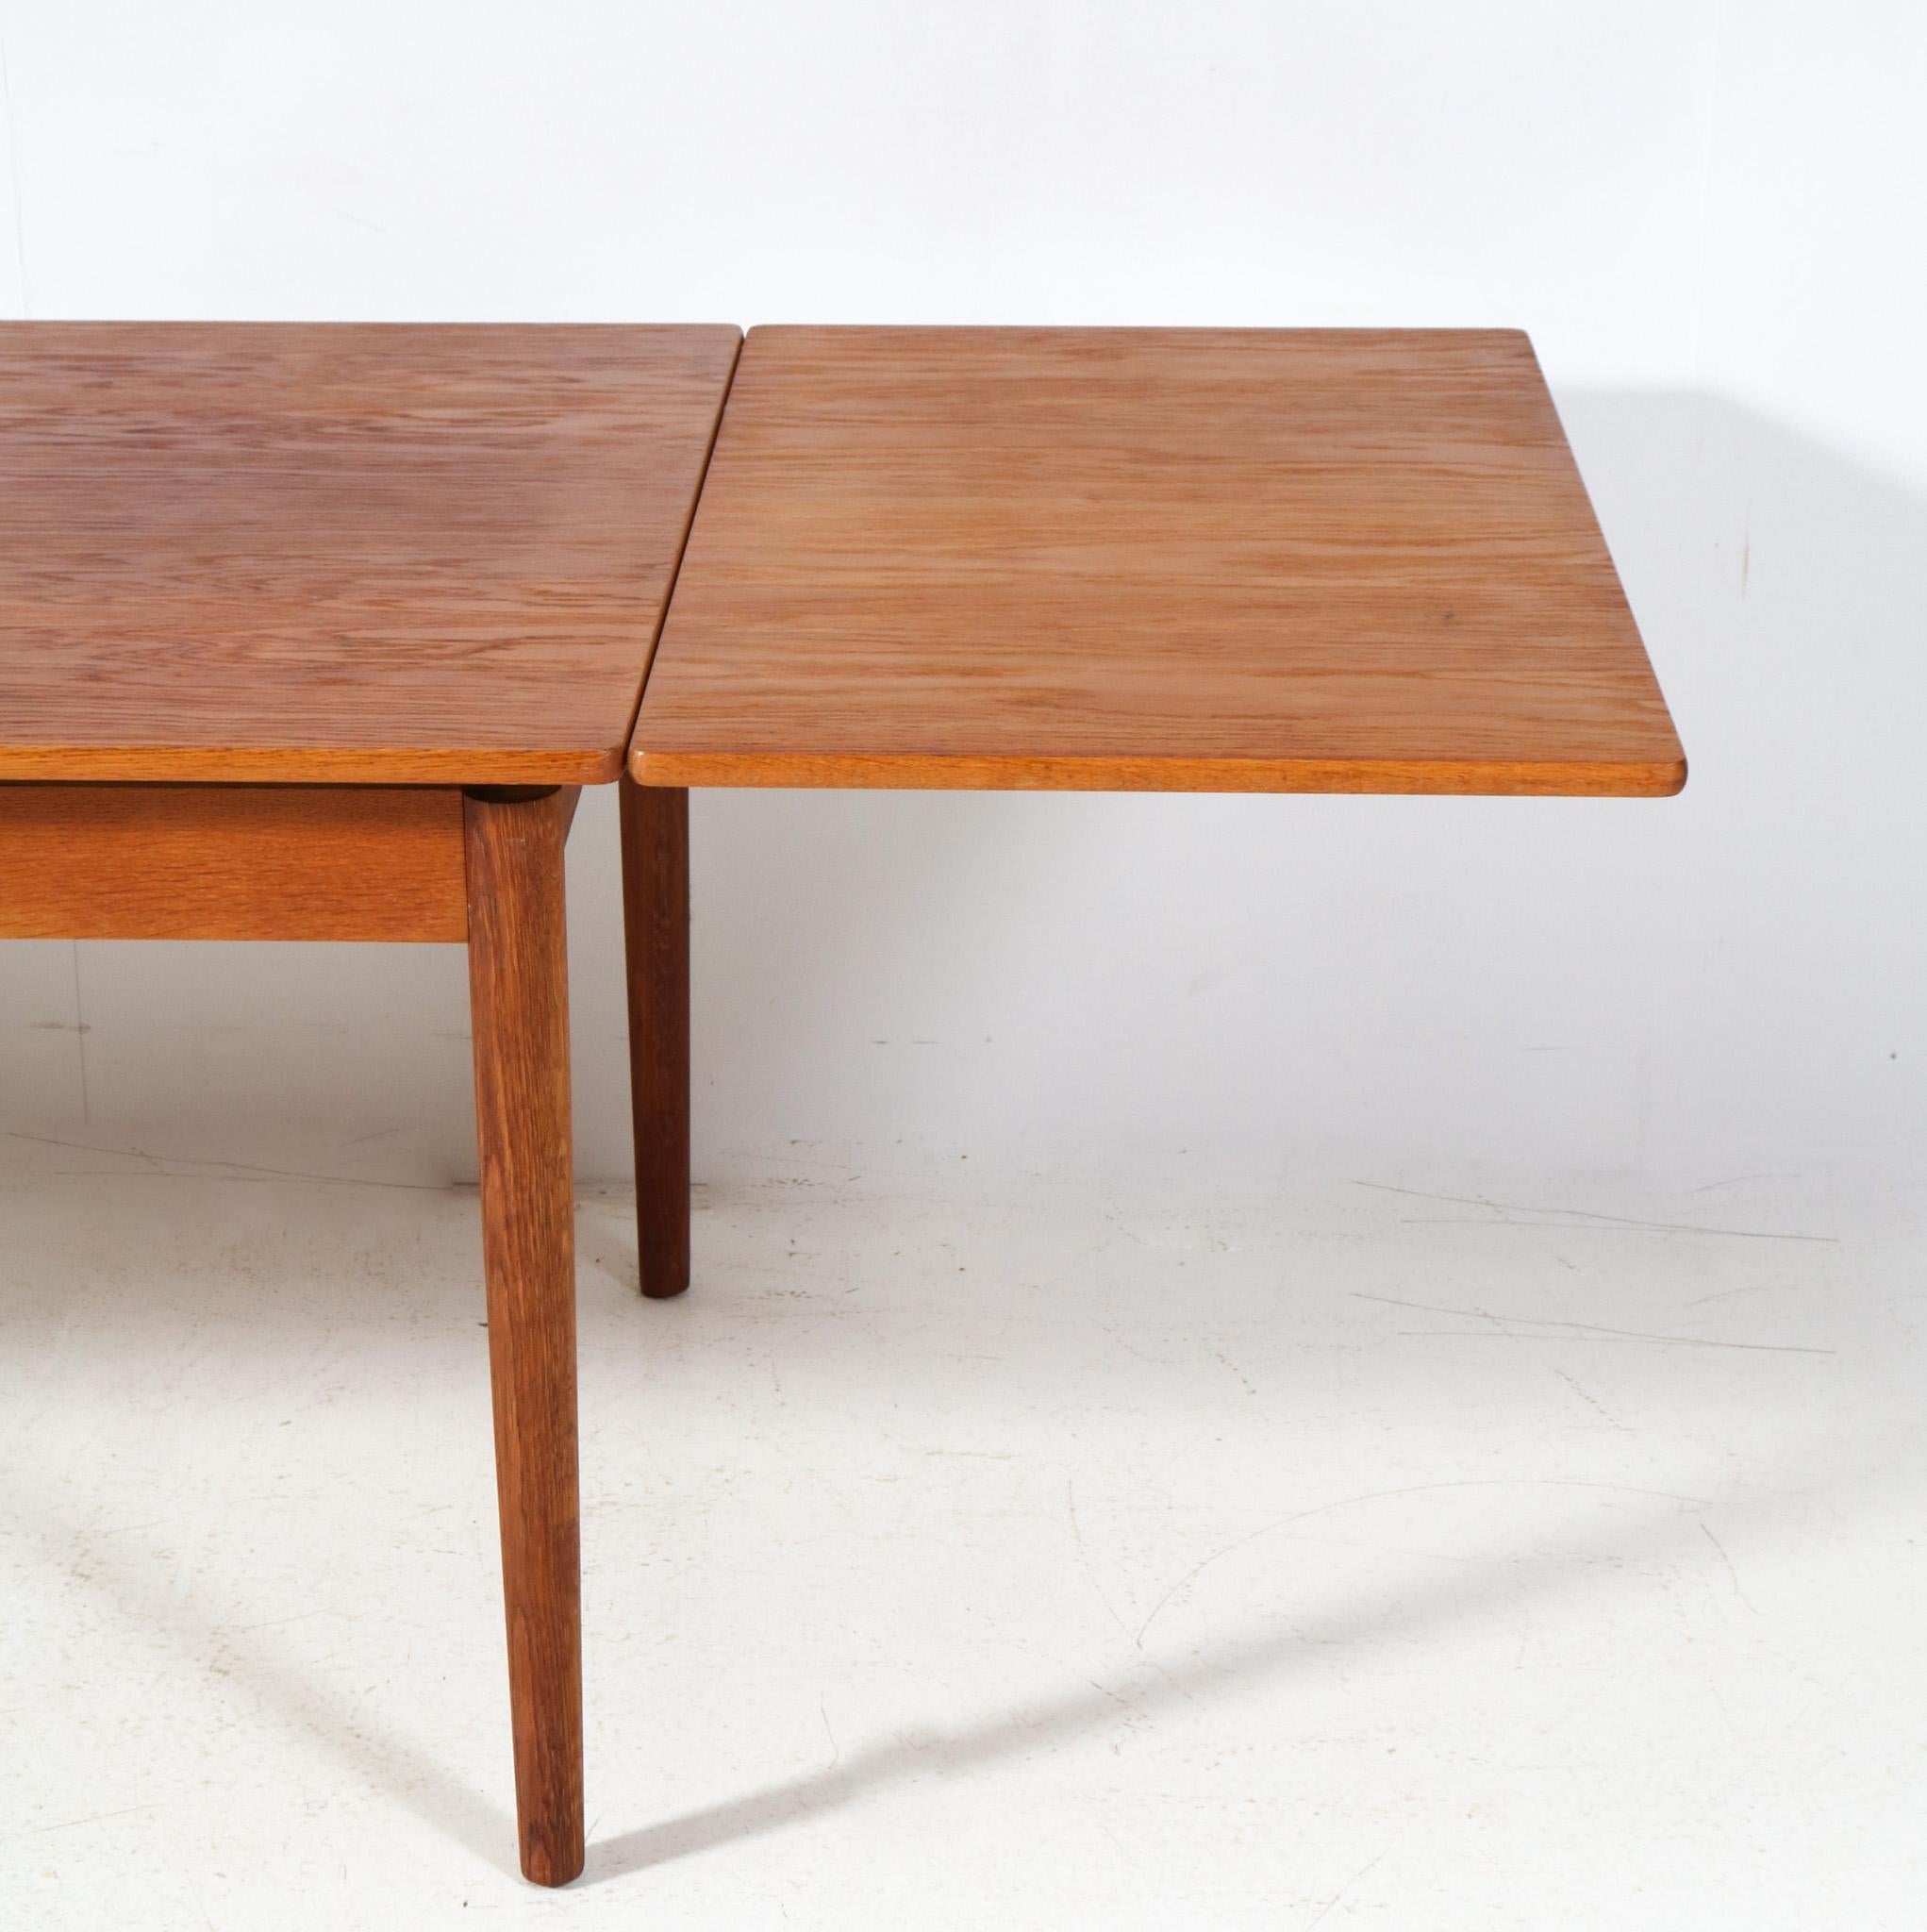  Mid-Century Modern Teak Extendable Dining Room Table Mo. 215 by Farstrup, 1960s For Sale 4